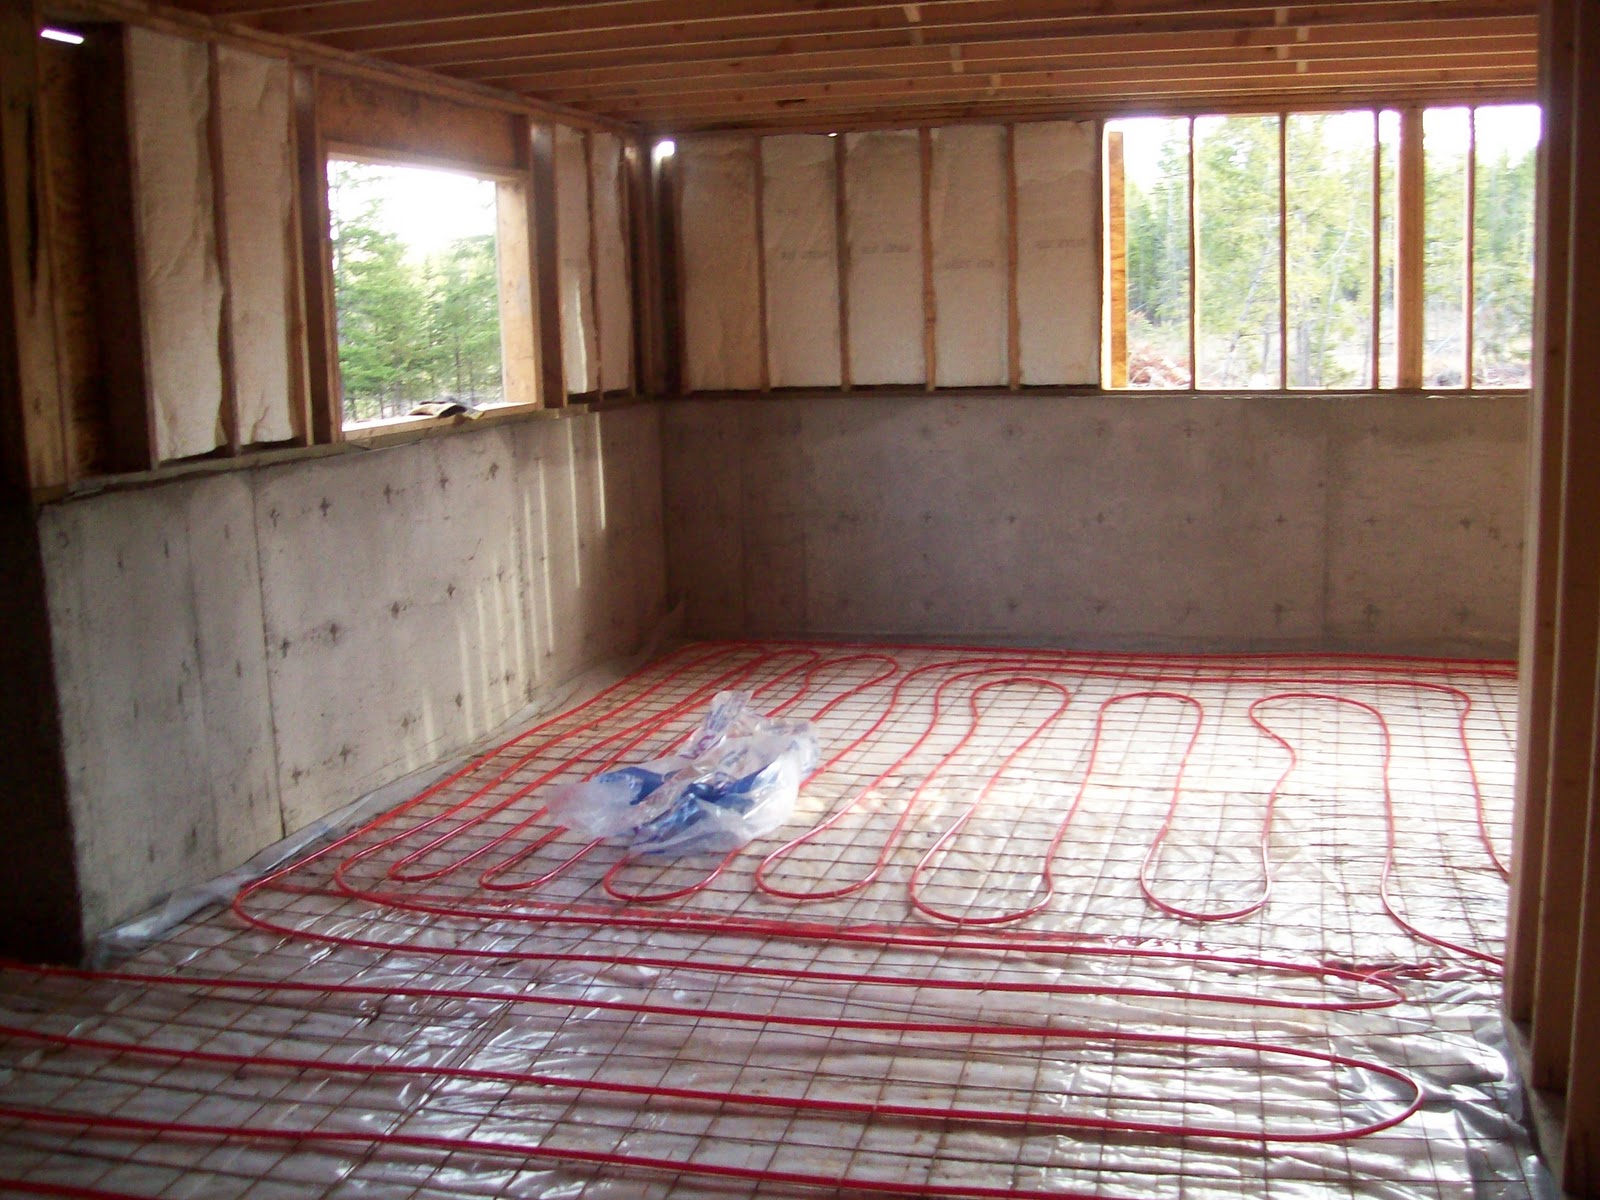 And Then There Were Ten: Radiant Heat, Basement Floors and ...